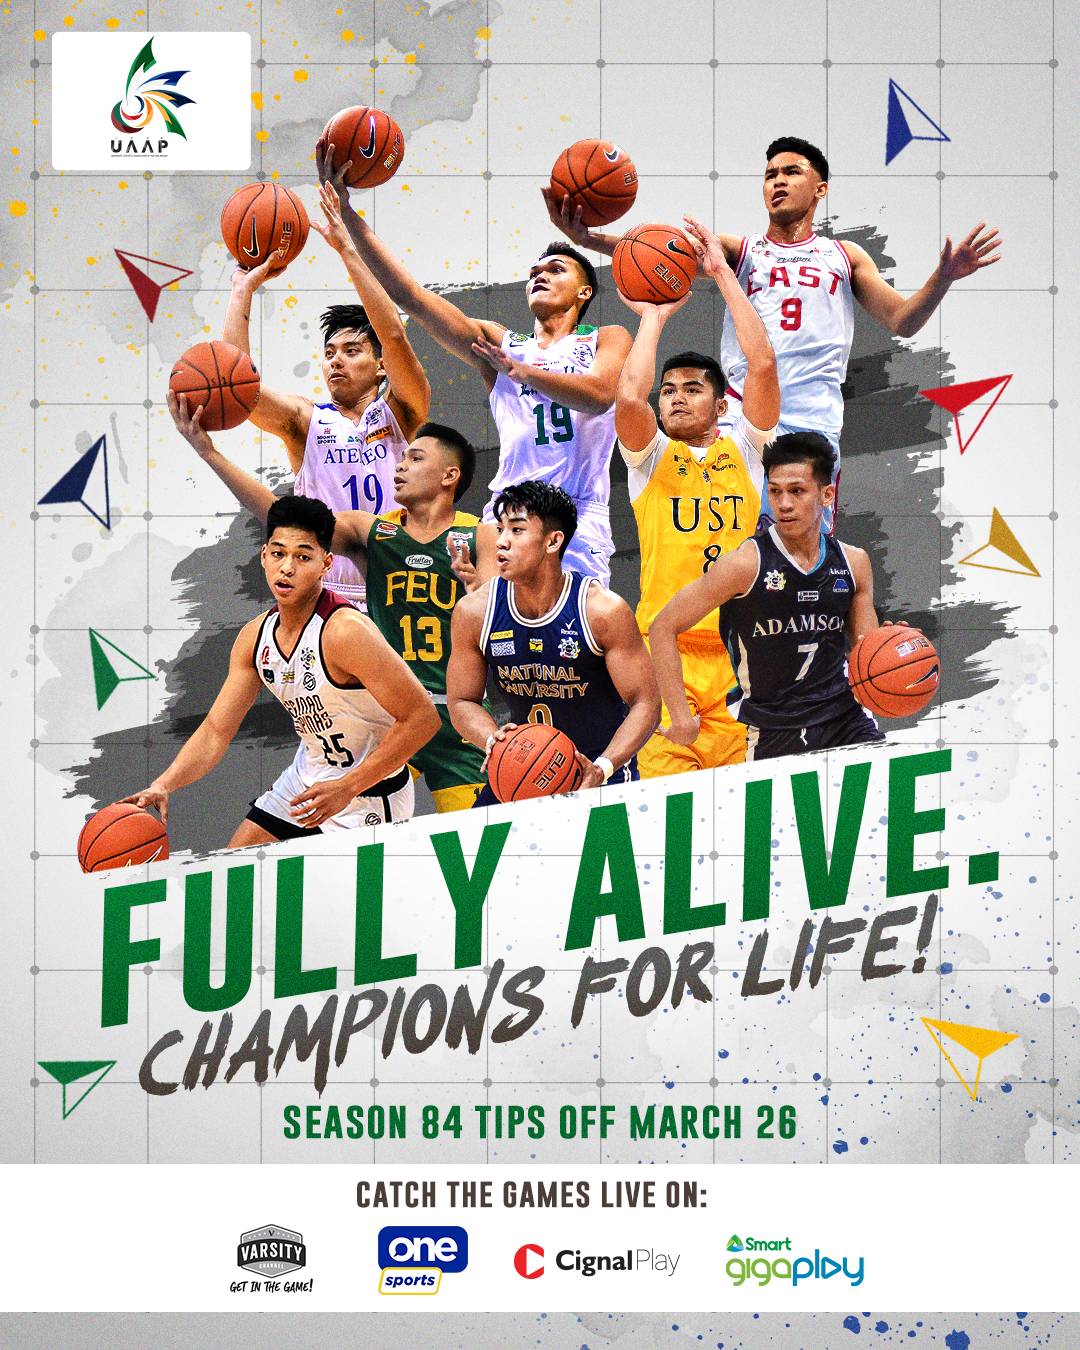 UAAP Season 84 Makes its Comeback with Action-Packed Coverage